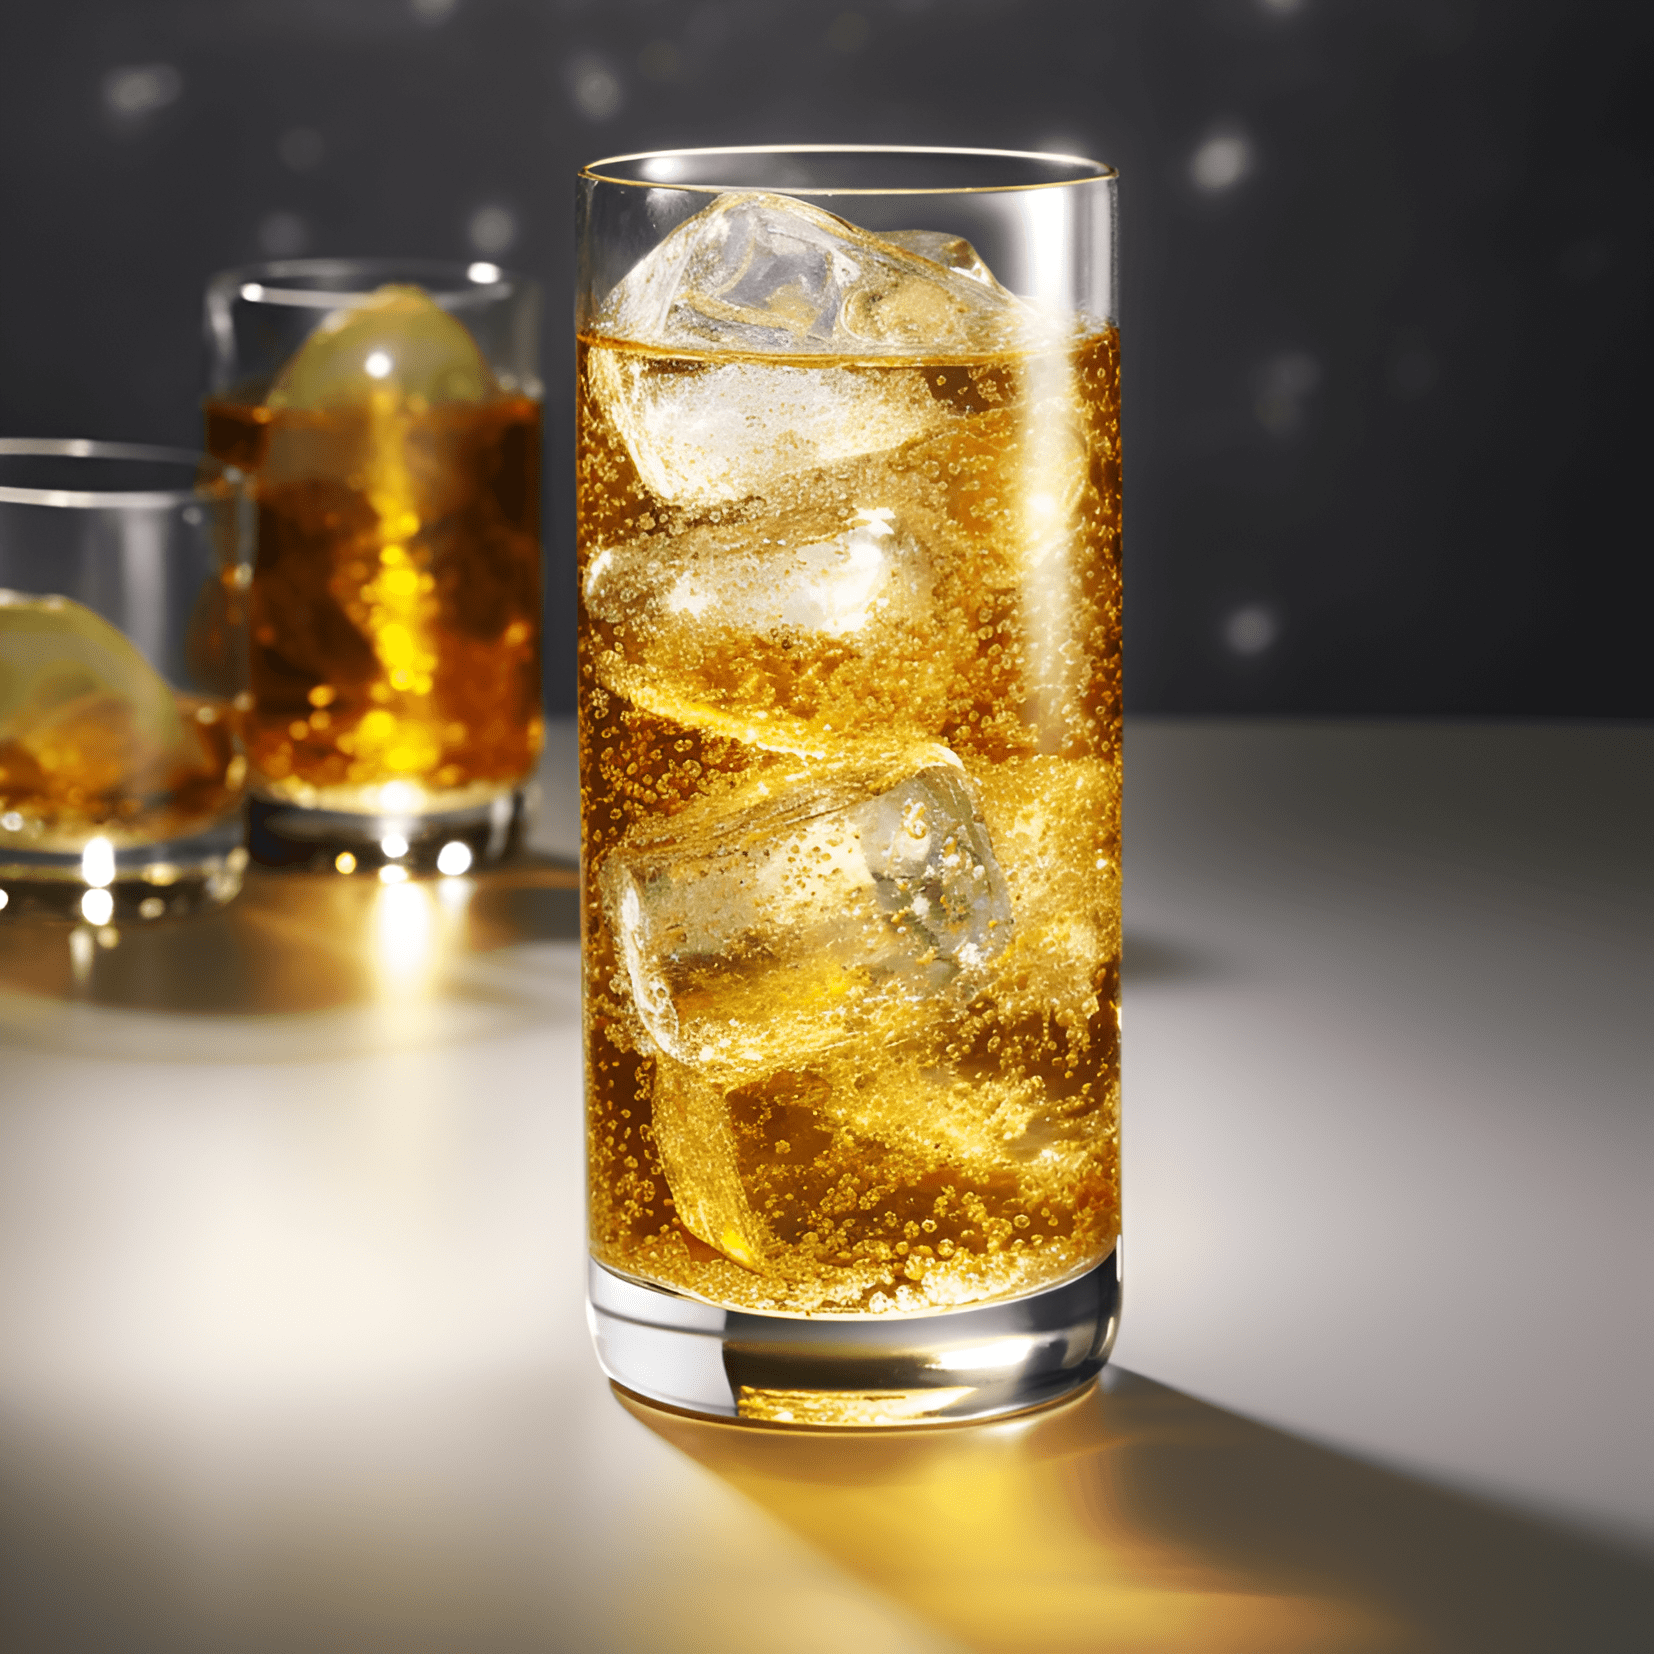 Highball Cocktail Recipe - The Highball cocktail is a refreshing, effervescent, and versatile drink. Its taste can be described as crisp, clean, and slightly sweet, with a subtle hint of bitterness from the soda water. The whiskey adds warmth and depth, while the soda water lightens the drink and adds a pleasant fizz.